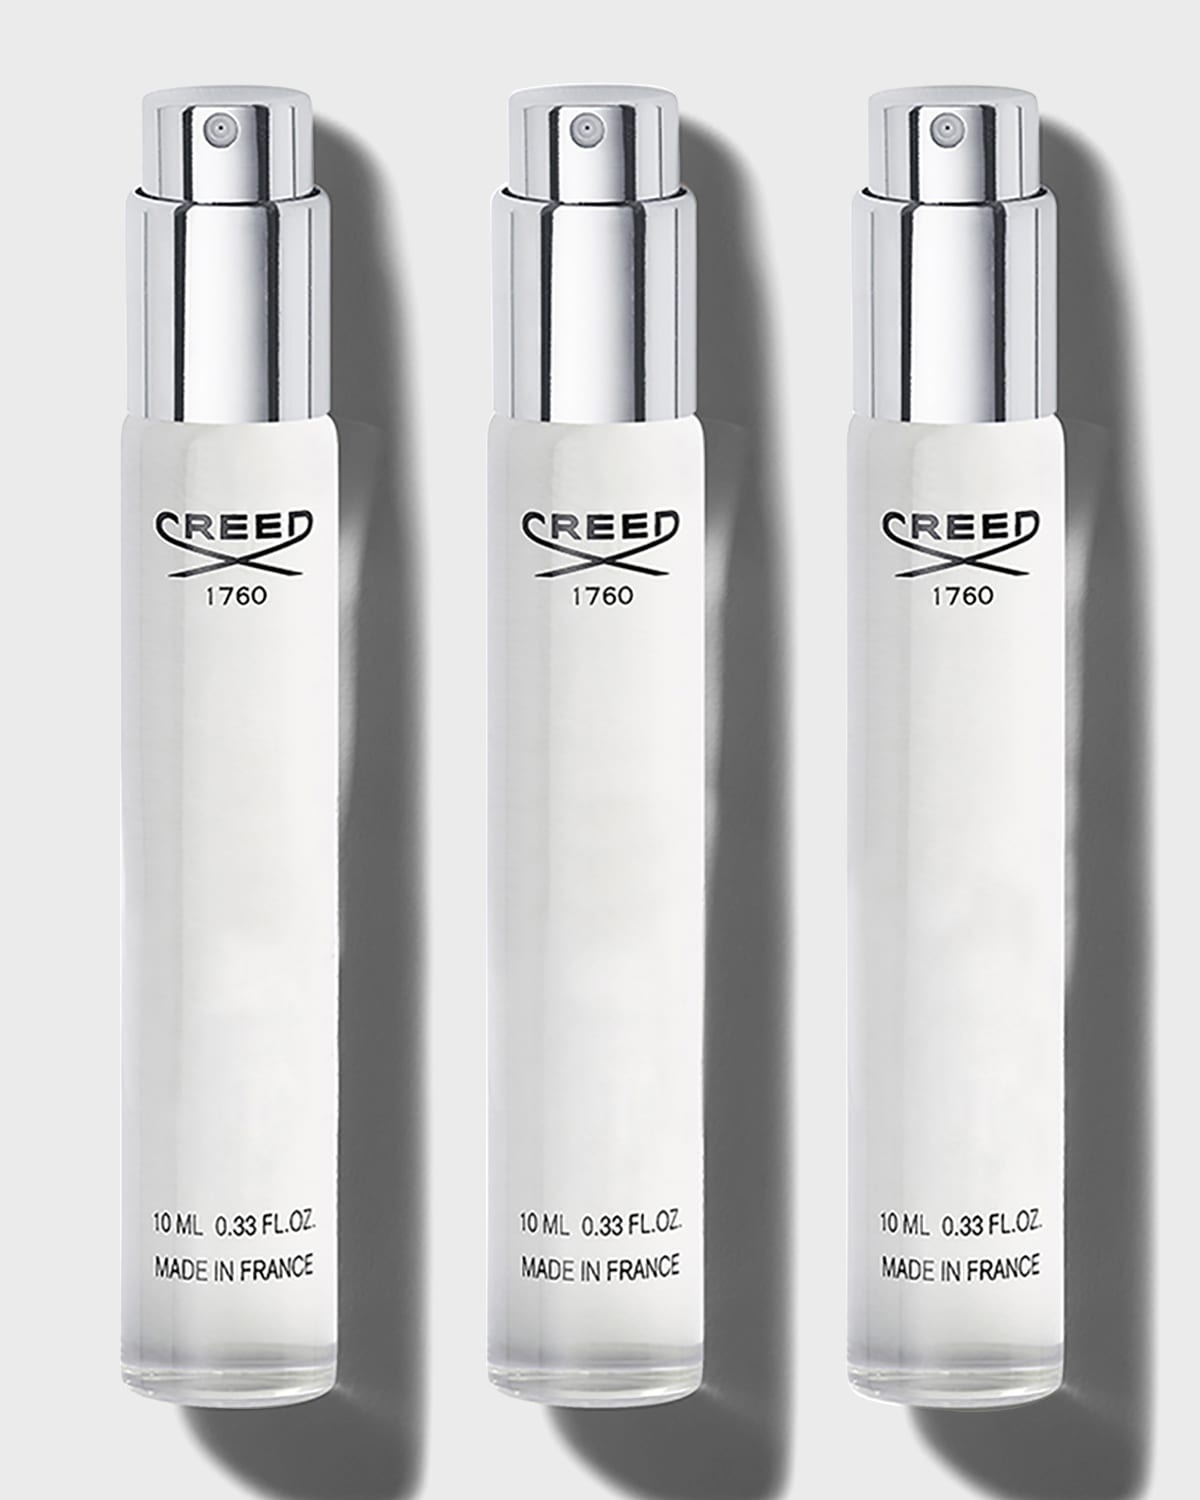 CREED Blue Leather Travel Spray Atomizer